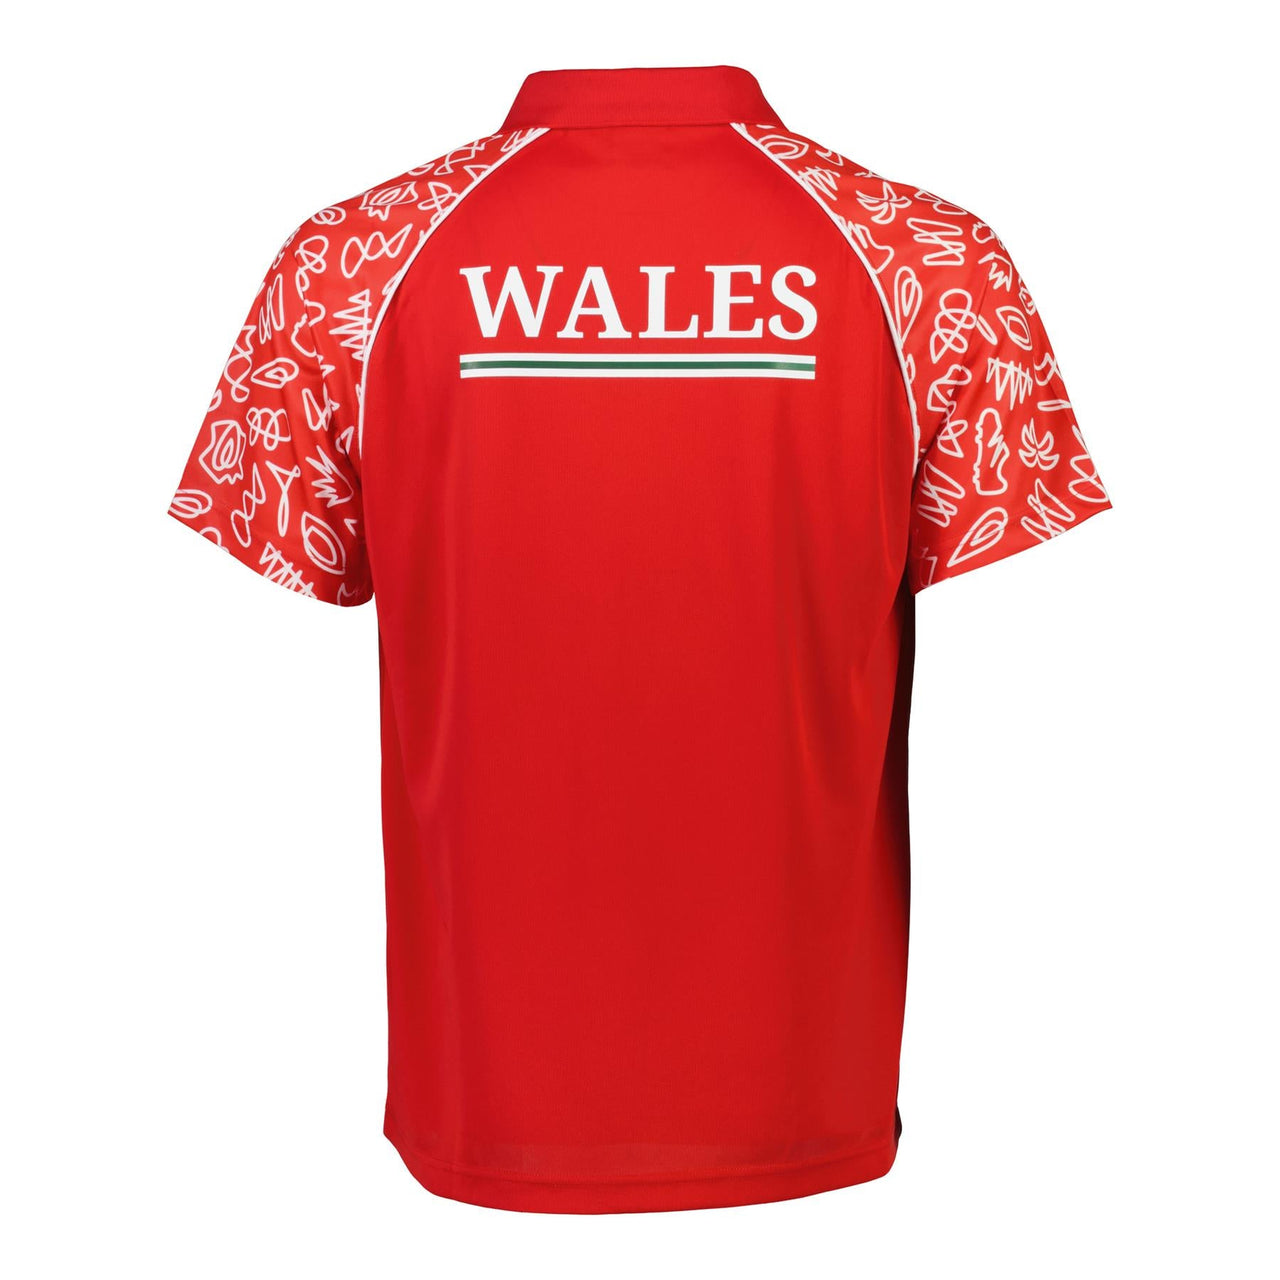 Wales Rugby World Cup 2023 Men's Polo Shirt